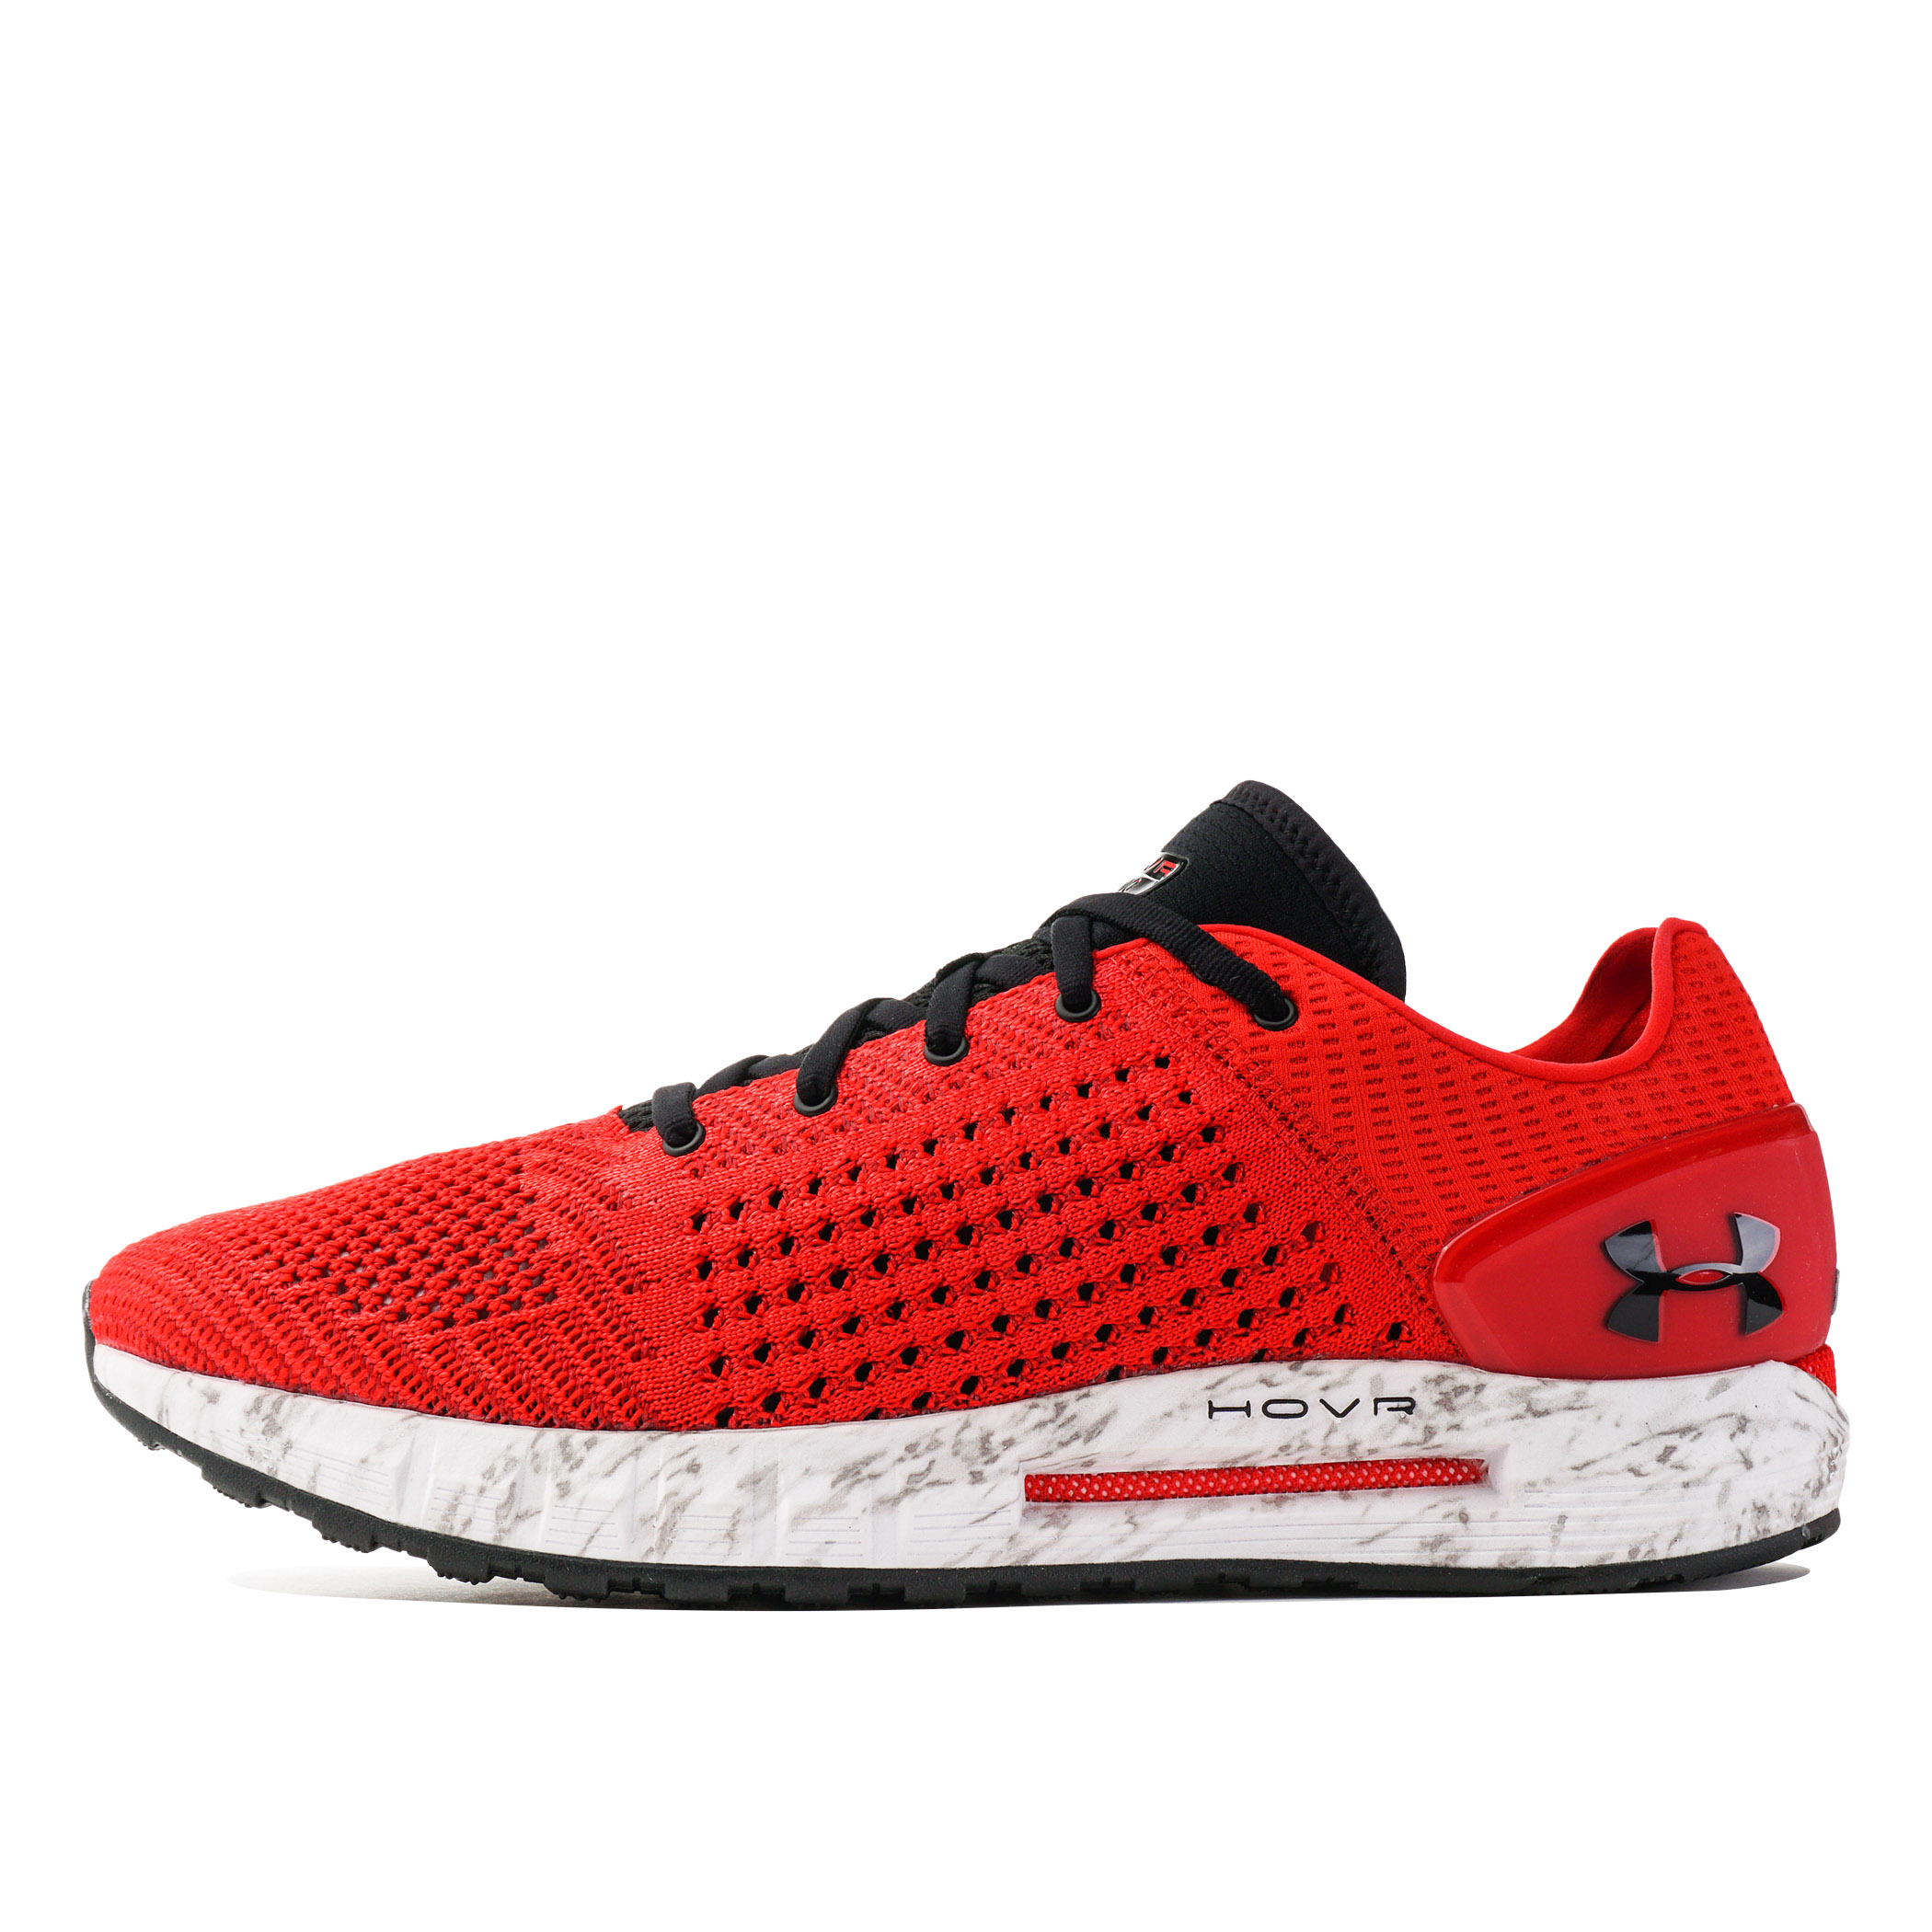 Under armour hovr sonic 6. Кроссовки HOVR Sonic. Кроссовки under Armour HOVR. Кроссовки мужские under Armour HOVR Sonic 3. Under Armour HOVR Sonic 5.